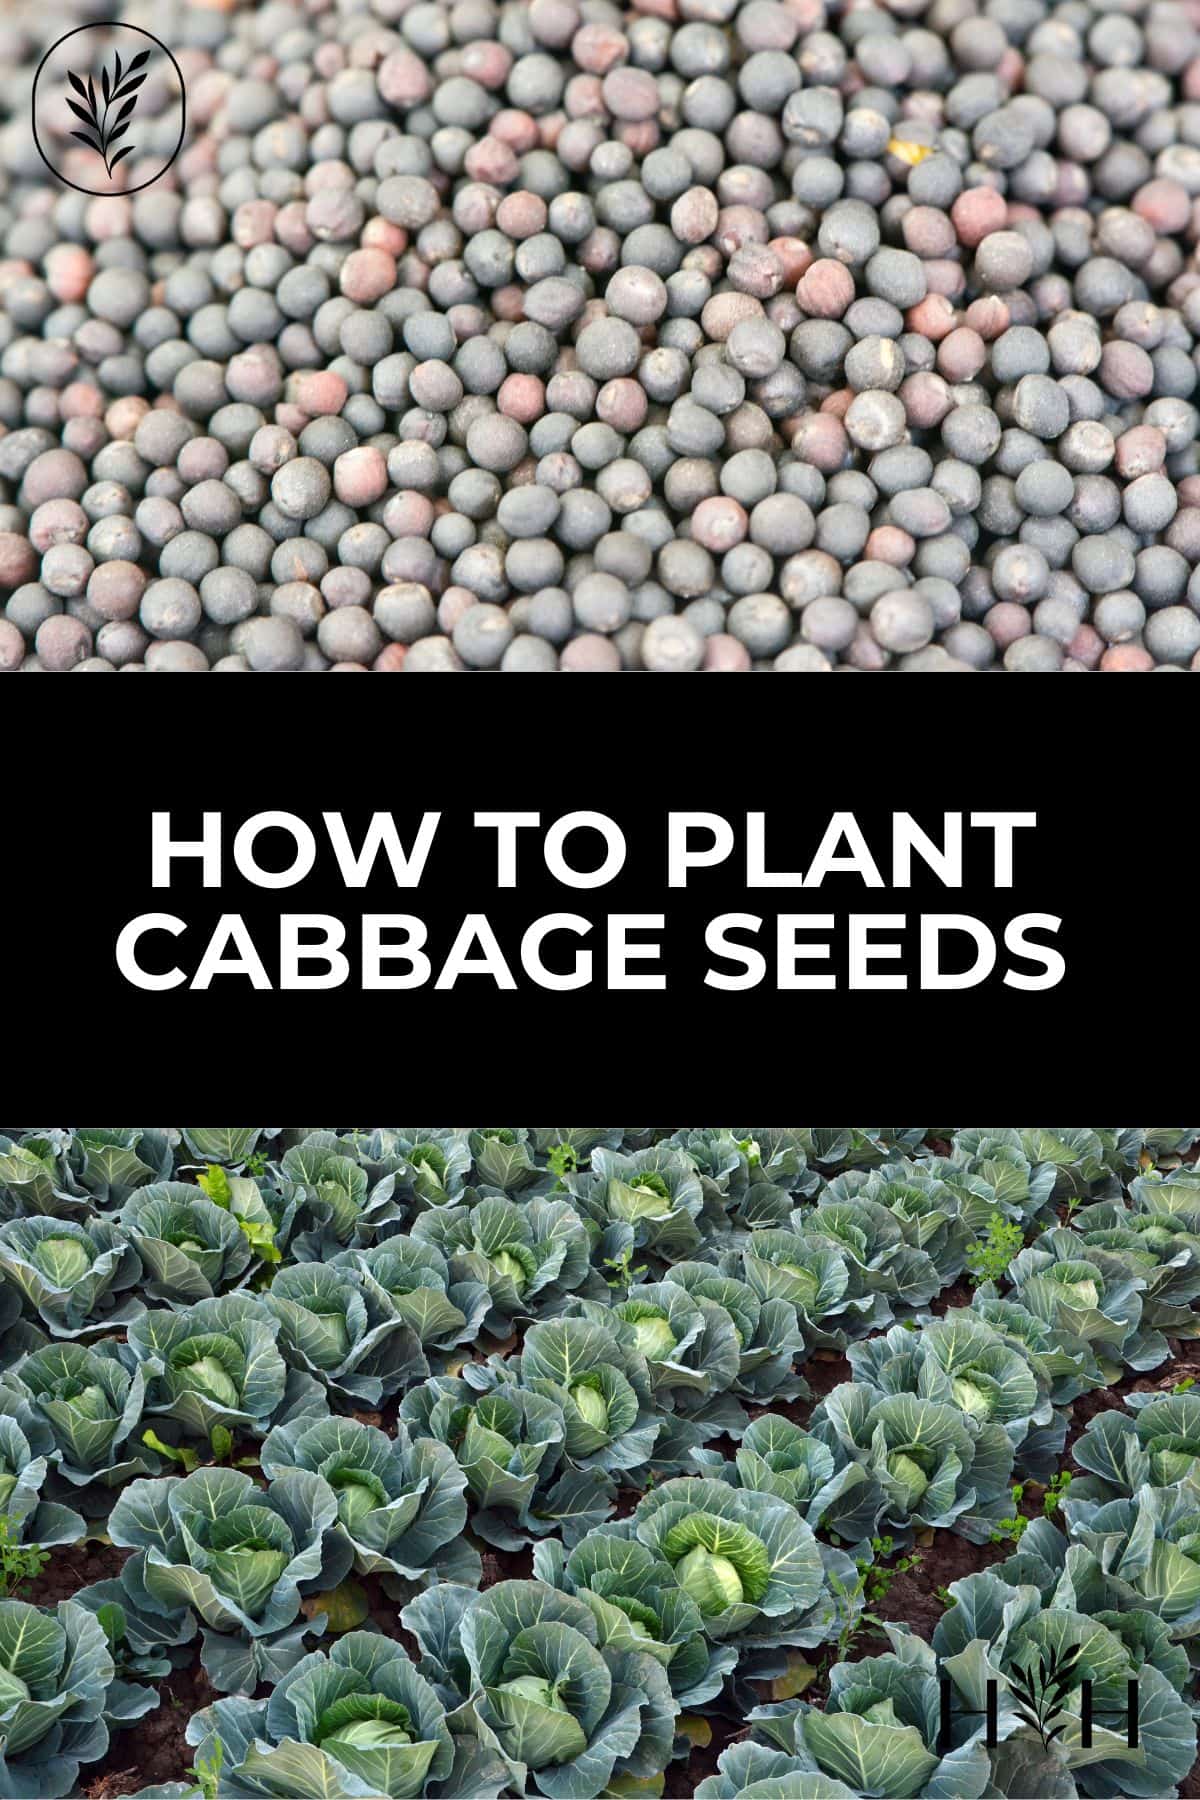 How to plant cabbage seeds via @home4theharvest